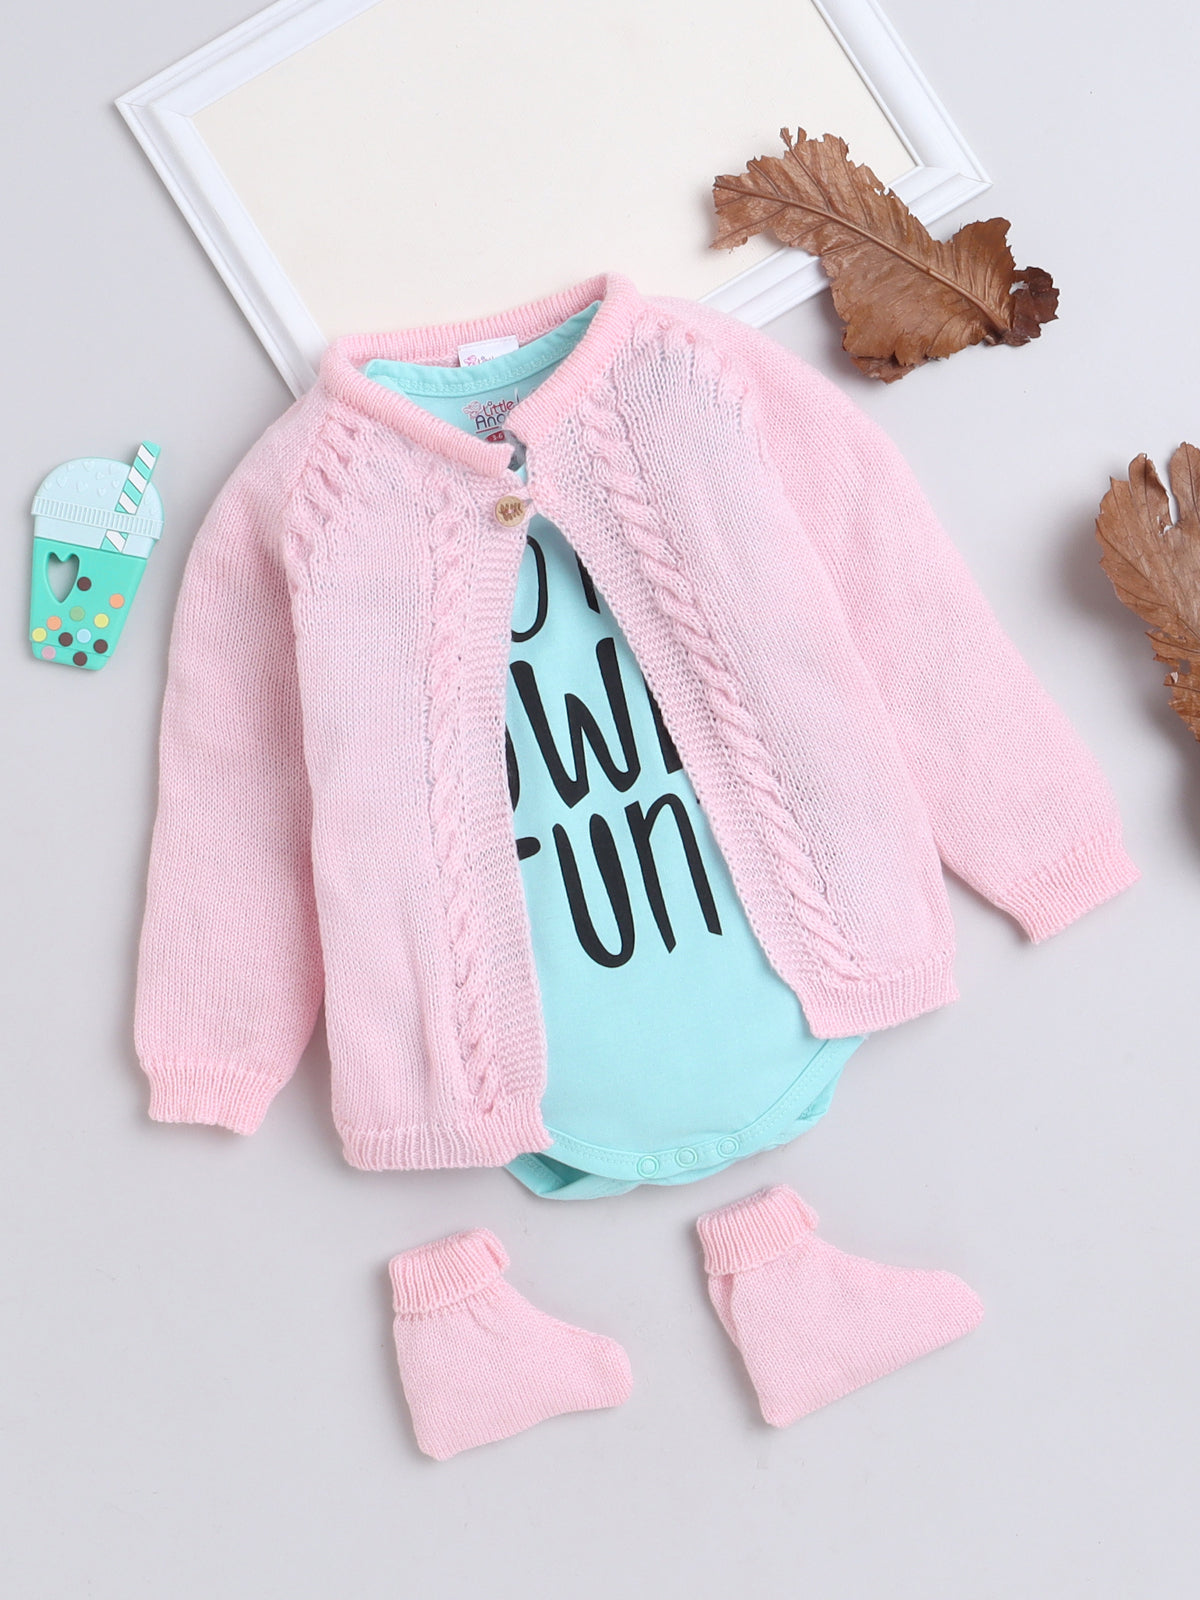 Wooden Button Front Open Pink Color Knitted Baby Sweater Jacket Set with matching Socks and stylish Cotton blue color Onesie